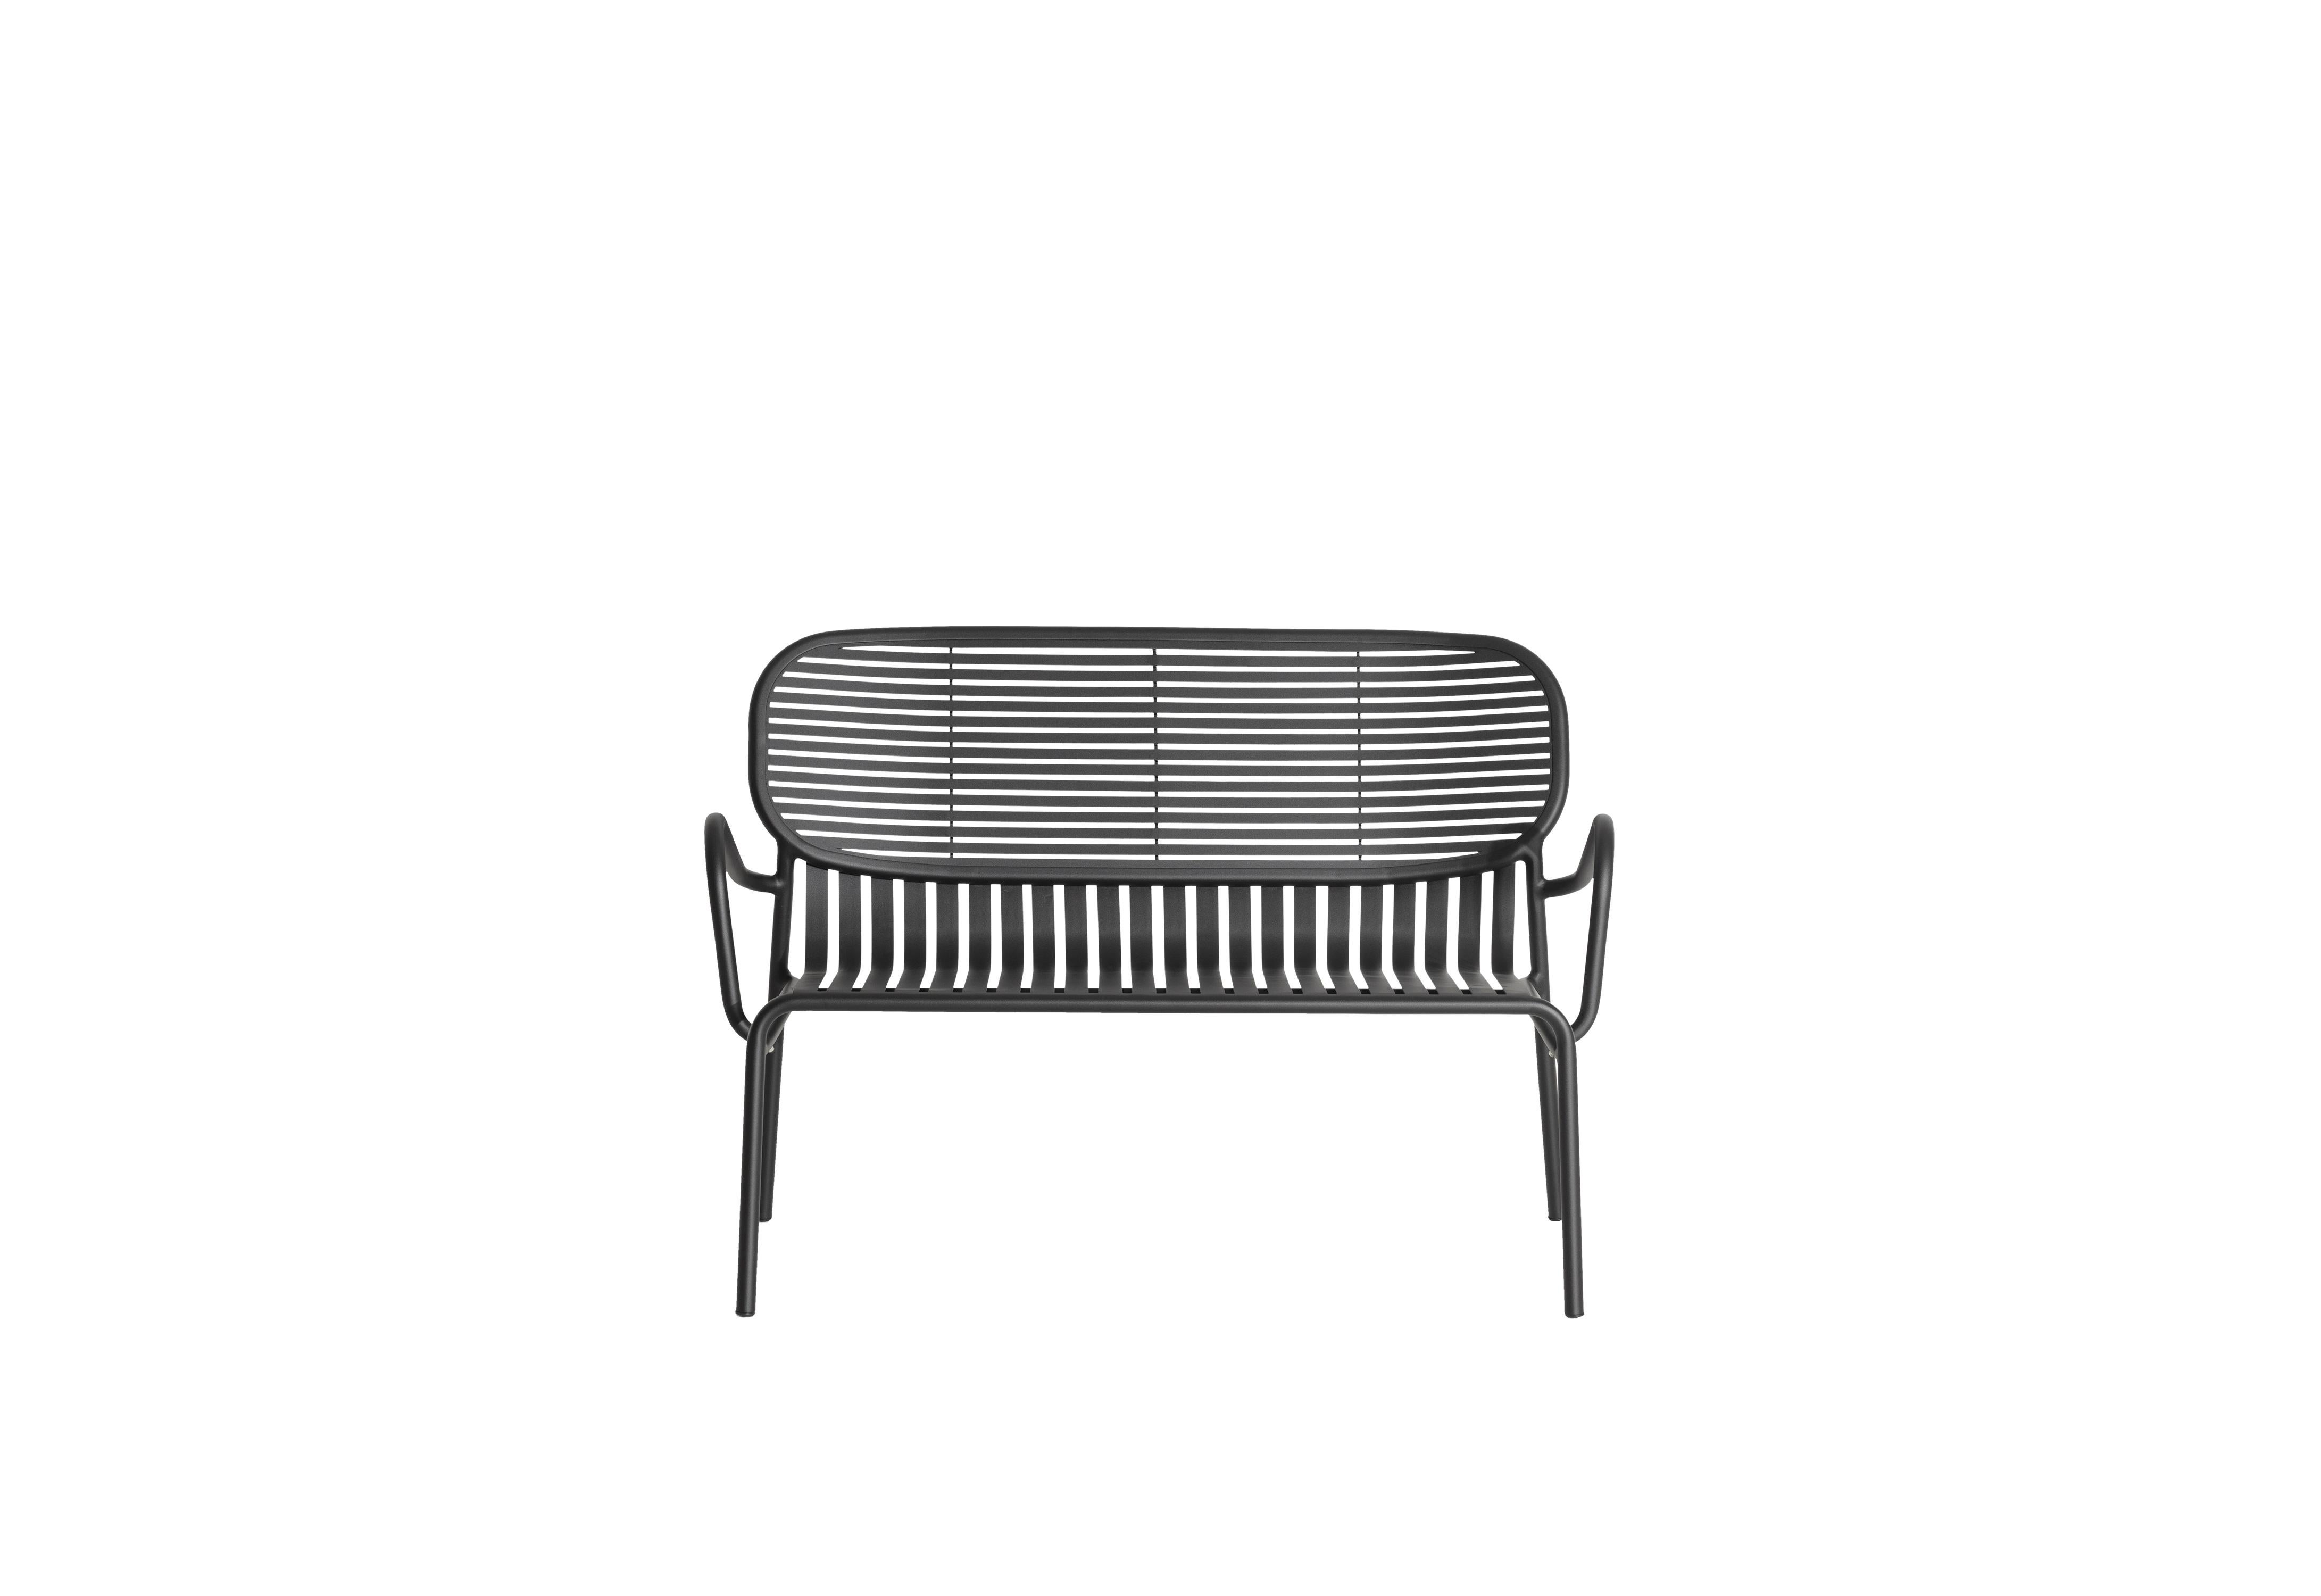 Petite Friture Week-End Sofa in Black Aluminium by Studio BrichetZiegler, 2017

The week-end collection is a full range of outdoor furniture, in aluminium grained epoxy paint, matt finish, that includes 18 functions and 8 colours for the retail